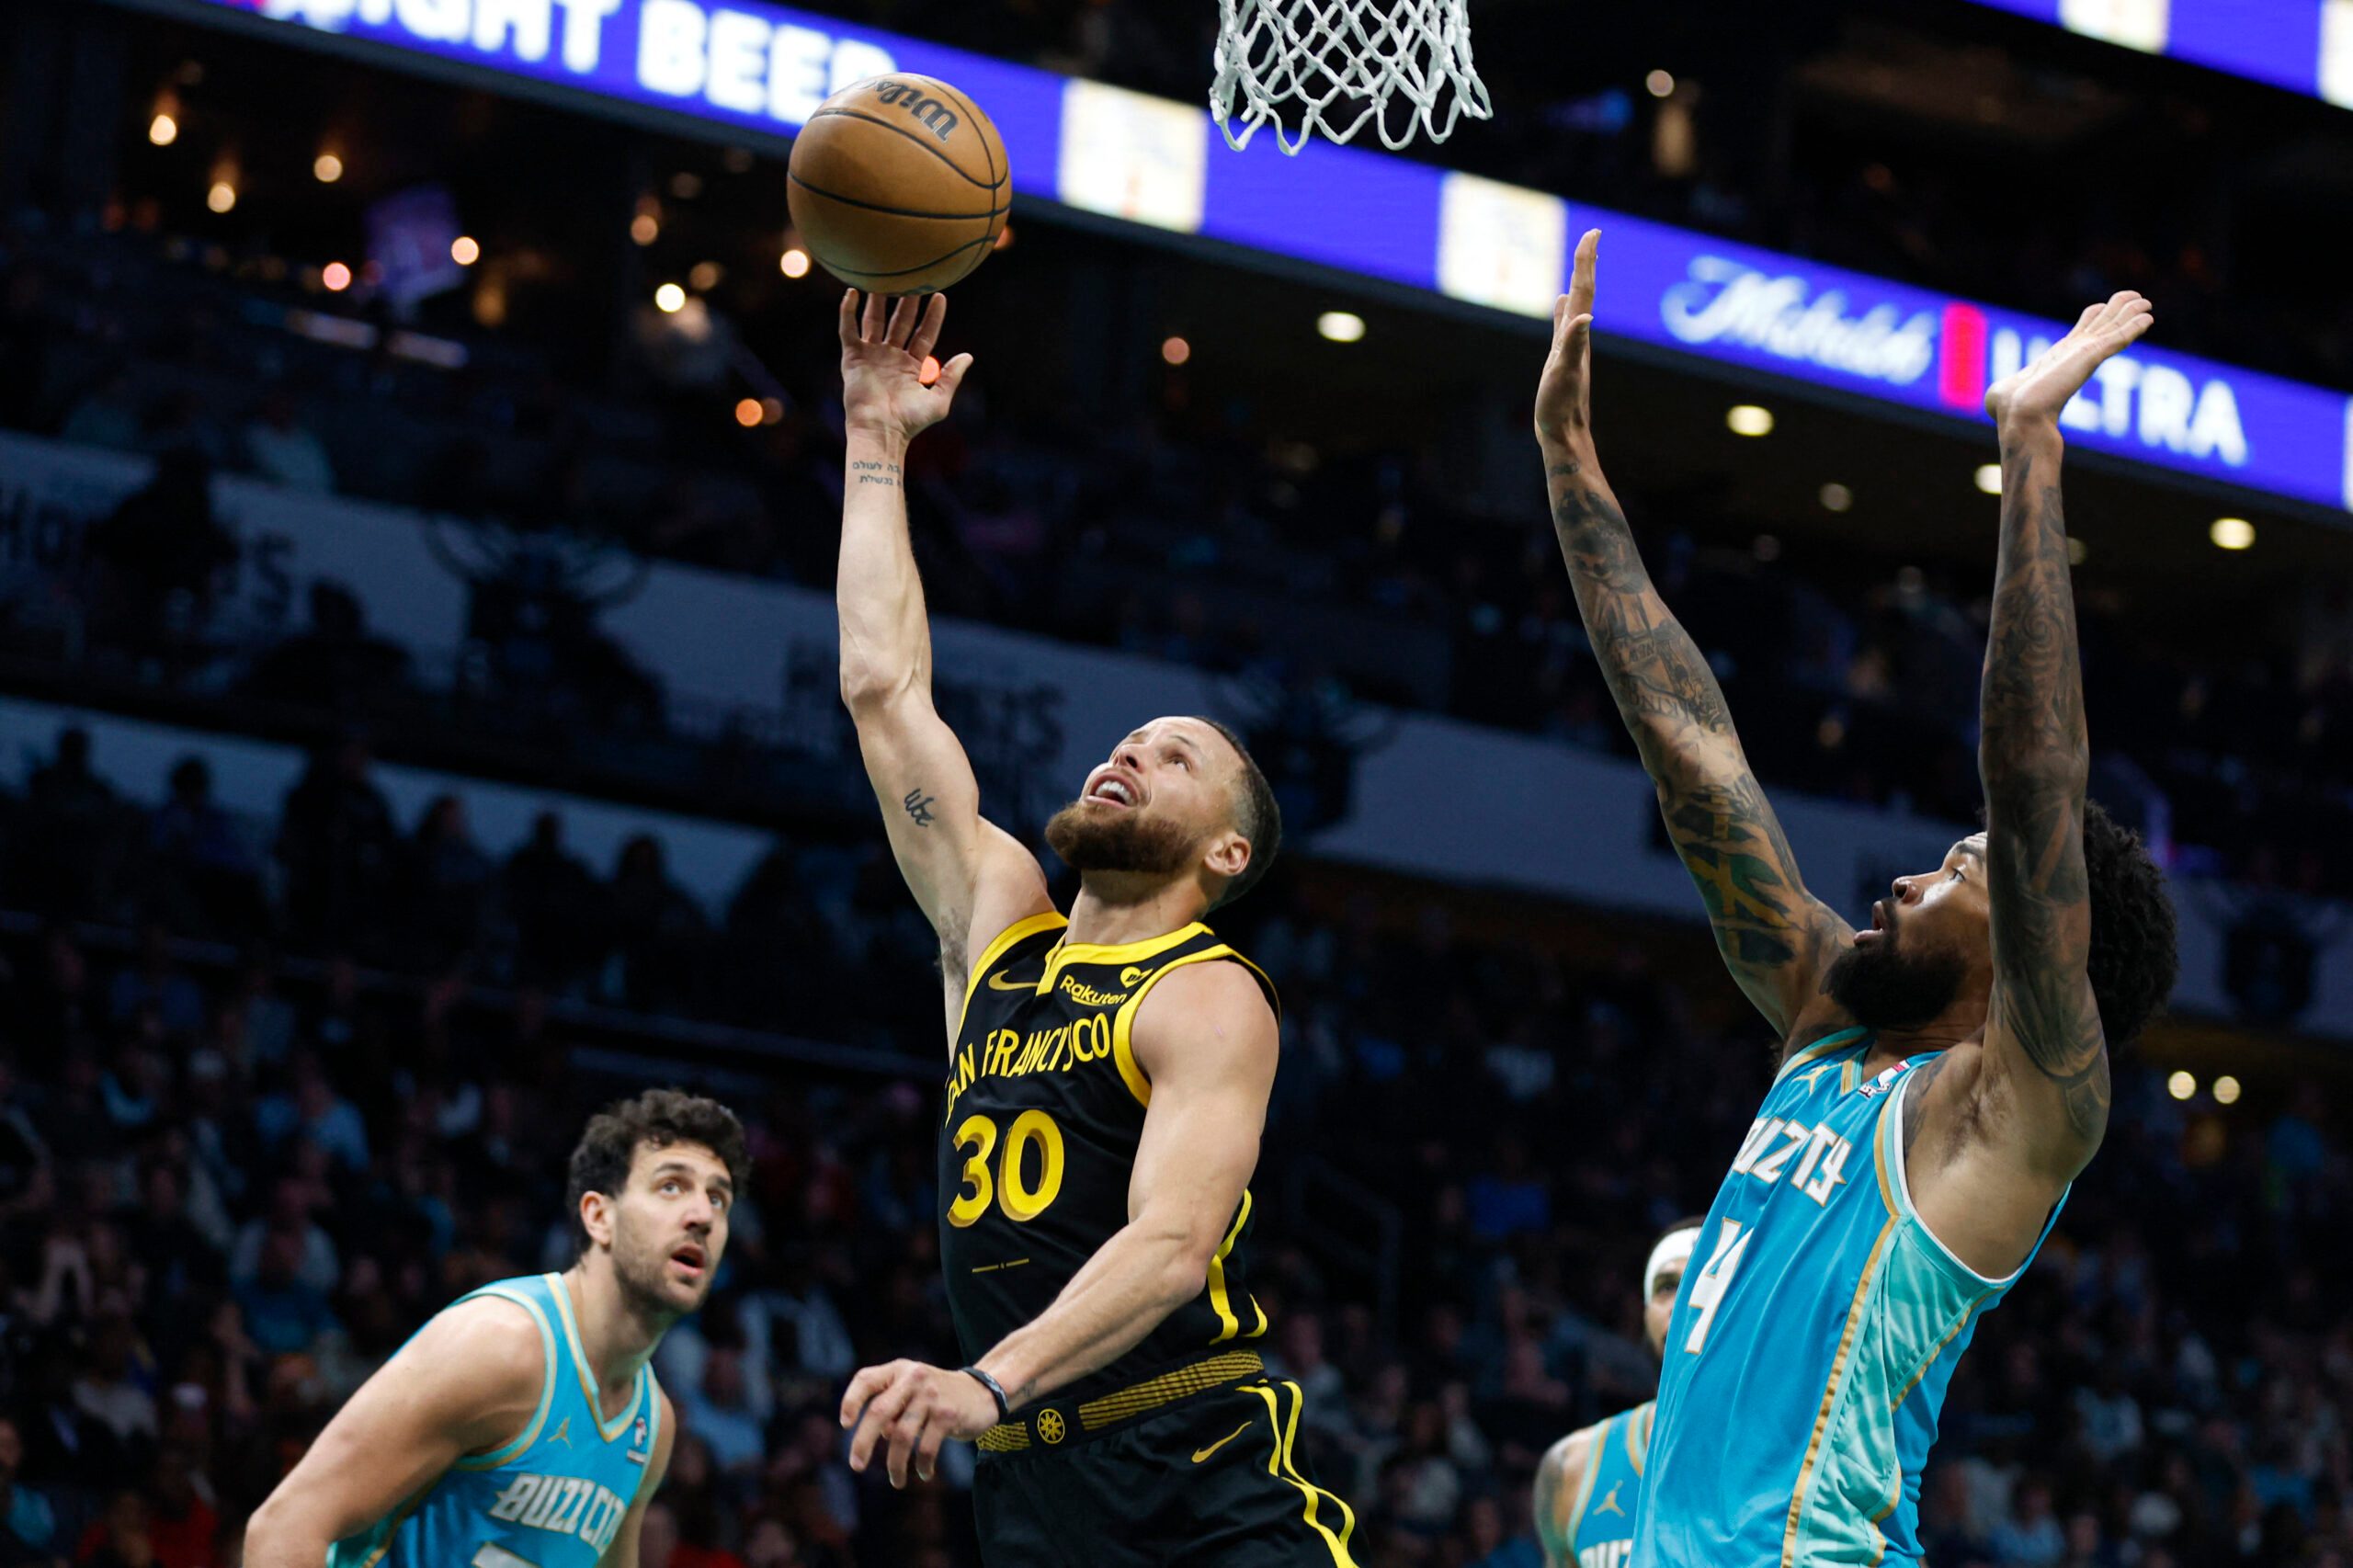 Charlotte native Steph Curry lifts Warriors in rout of hometown team Hornets